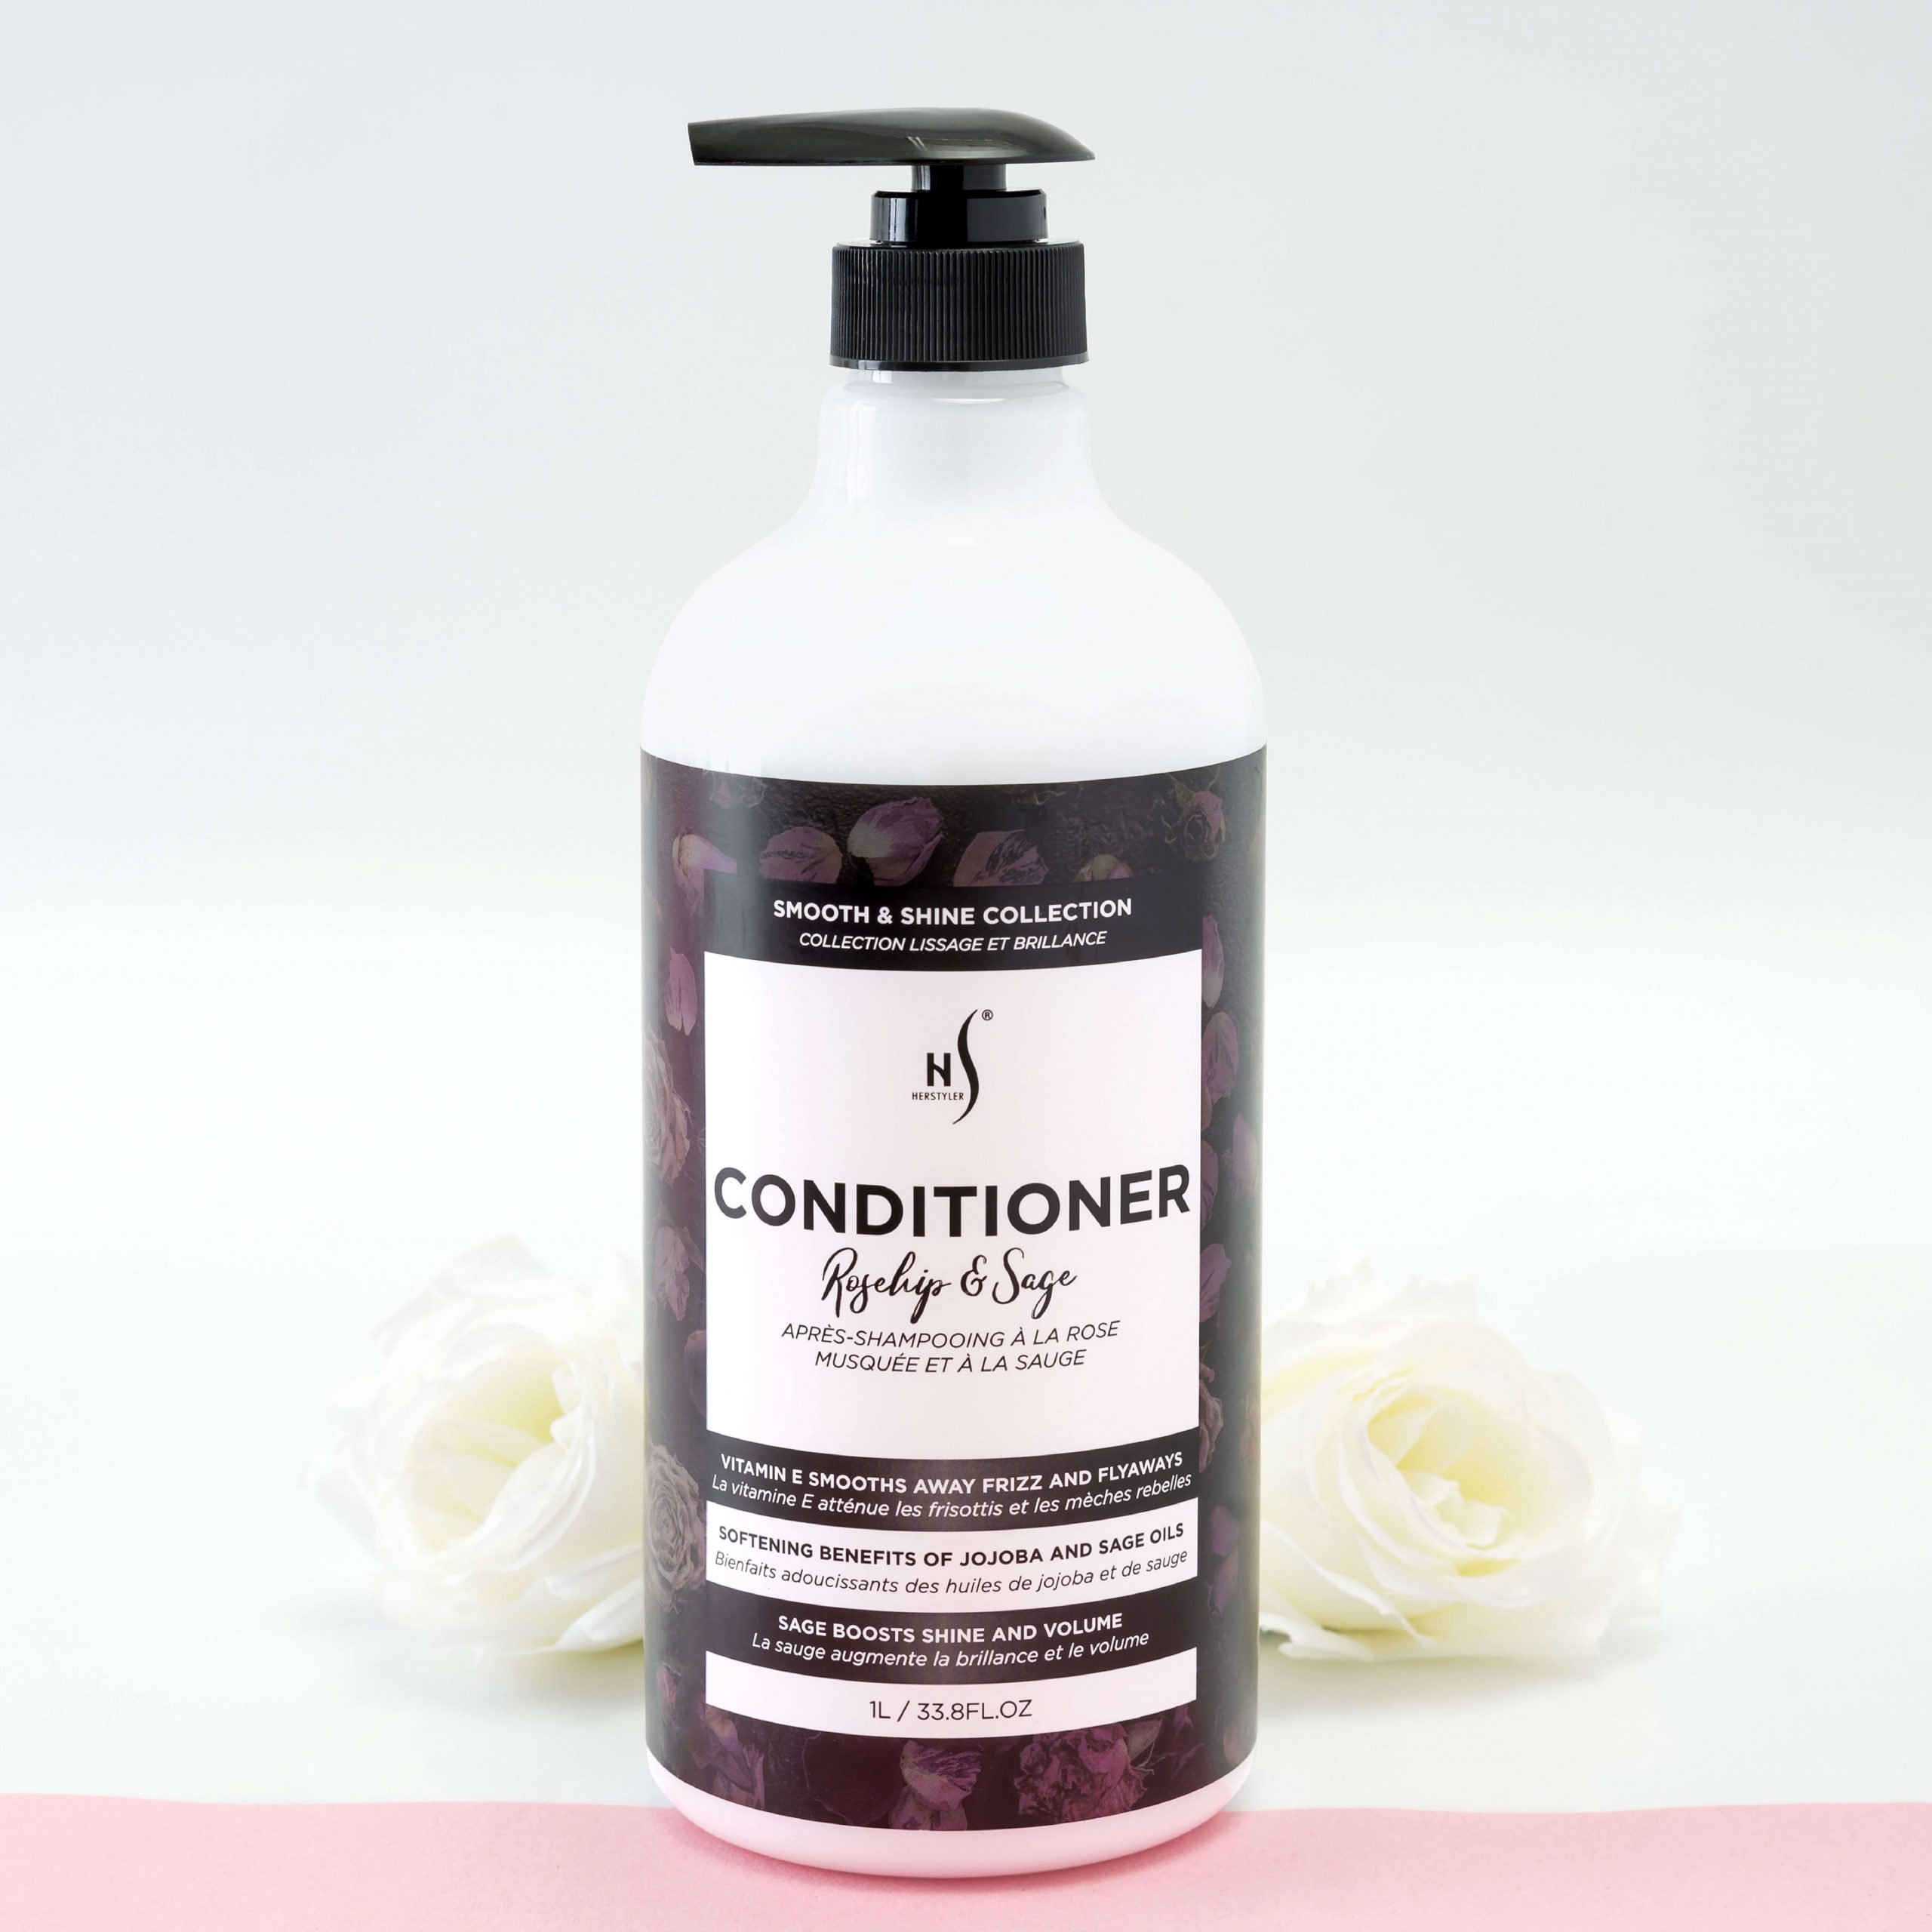 rosehip and sage conditioner